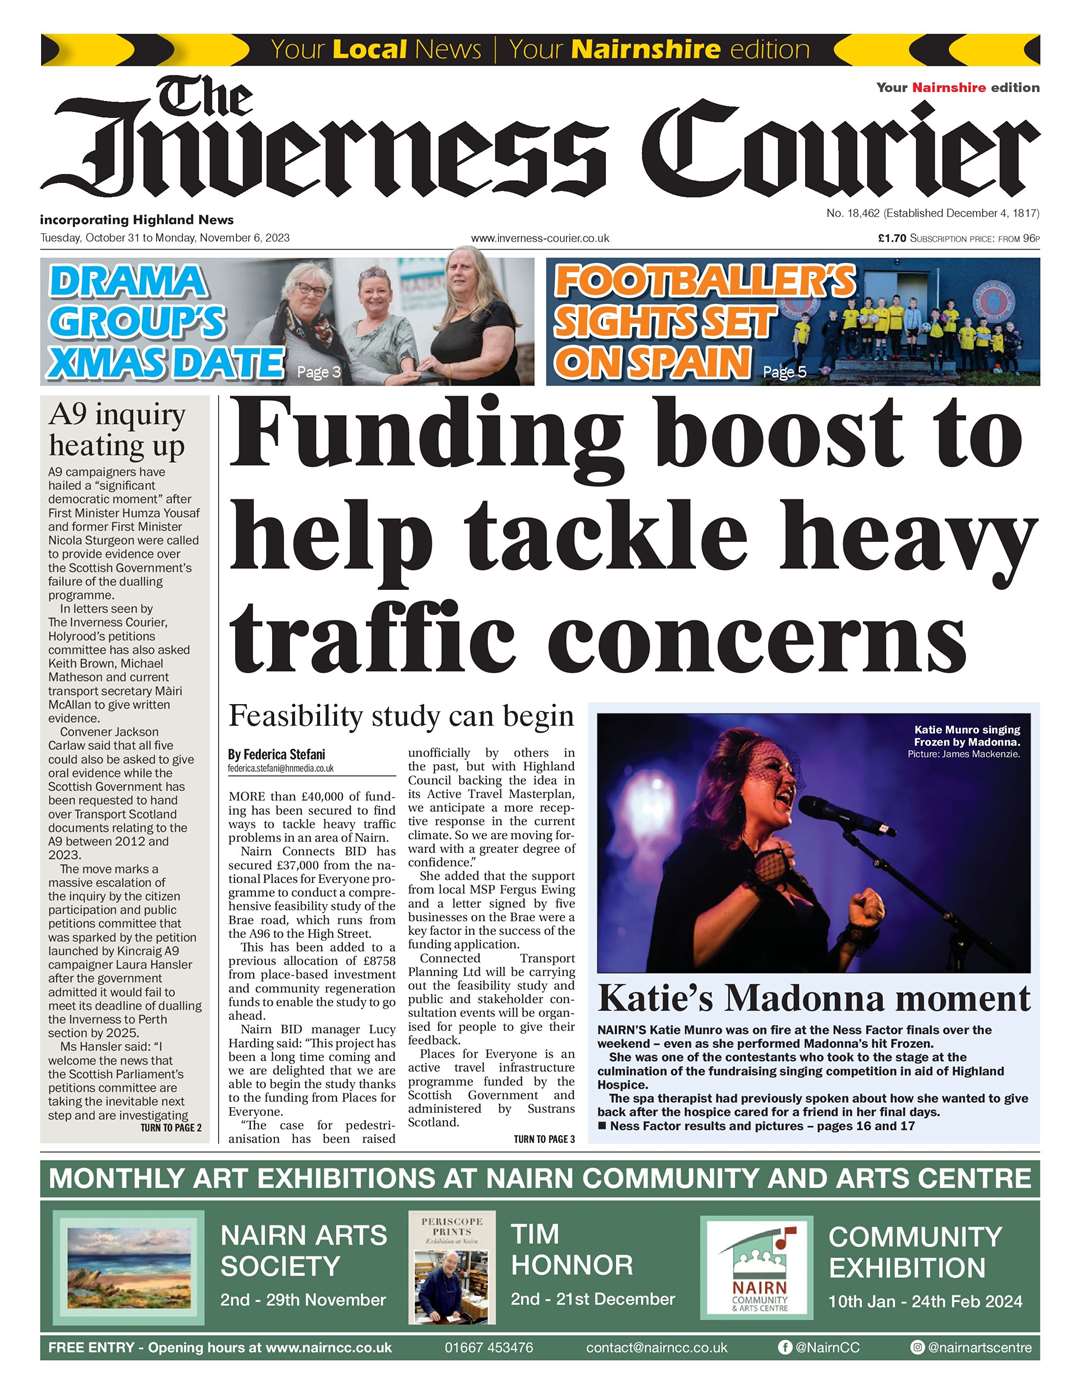 The Inverness Courier (Nairnshire edition), October 31, front page.